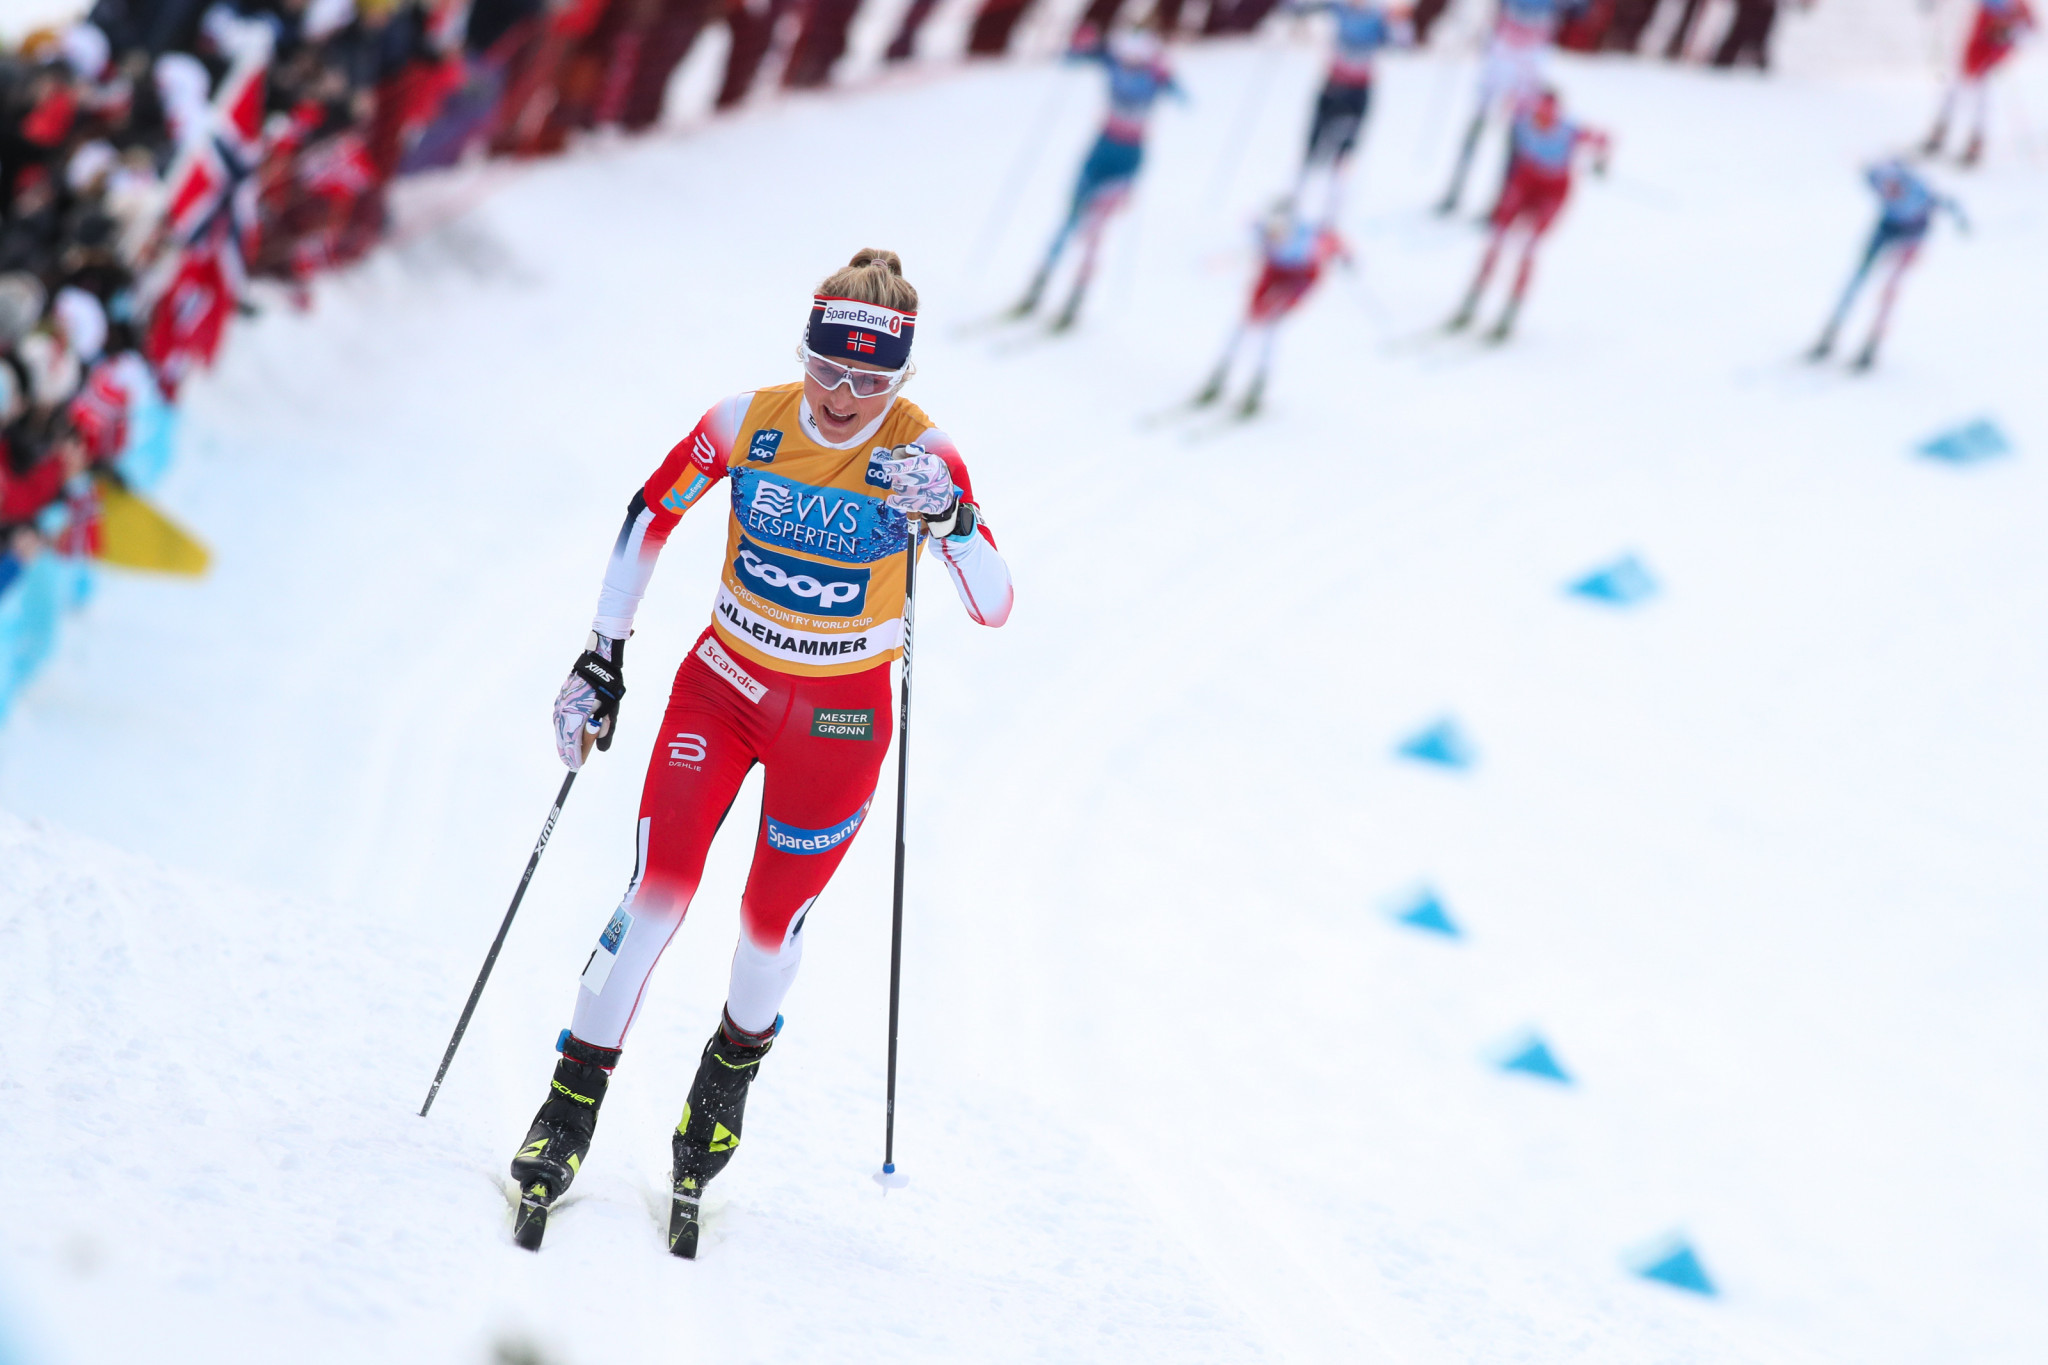 Johaug aims to continue FIS Cross-Country World Cup winning streak in Davos